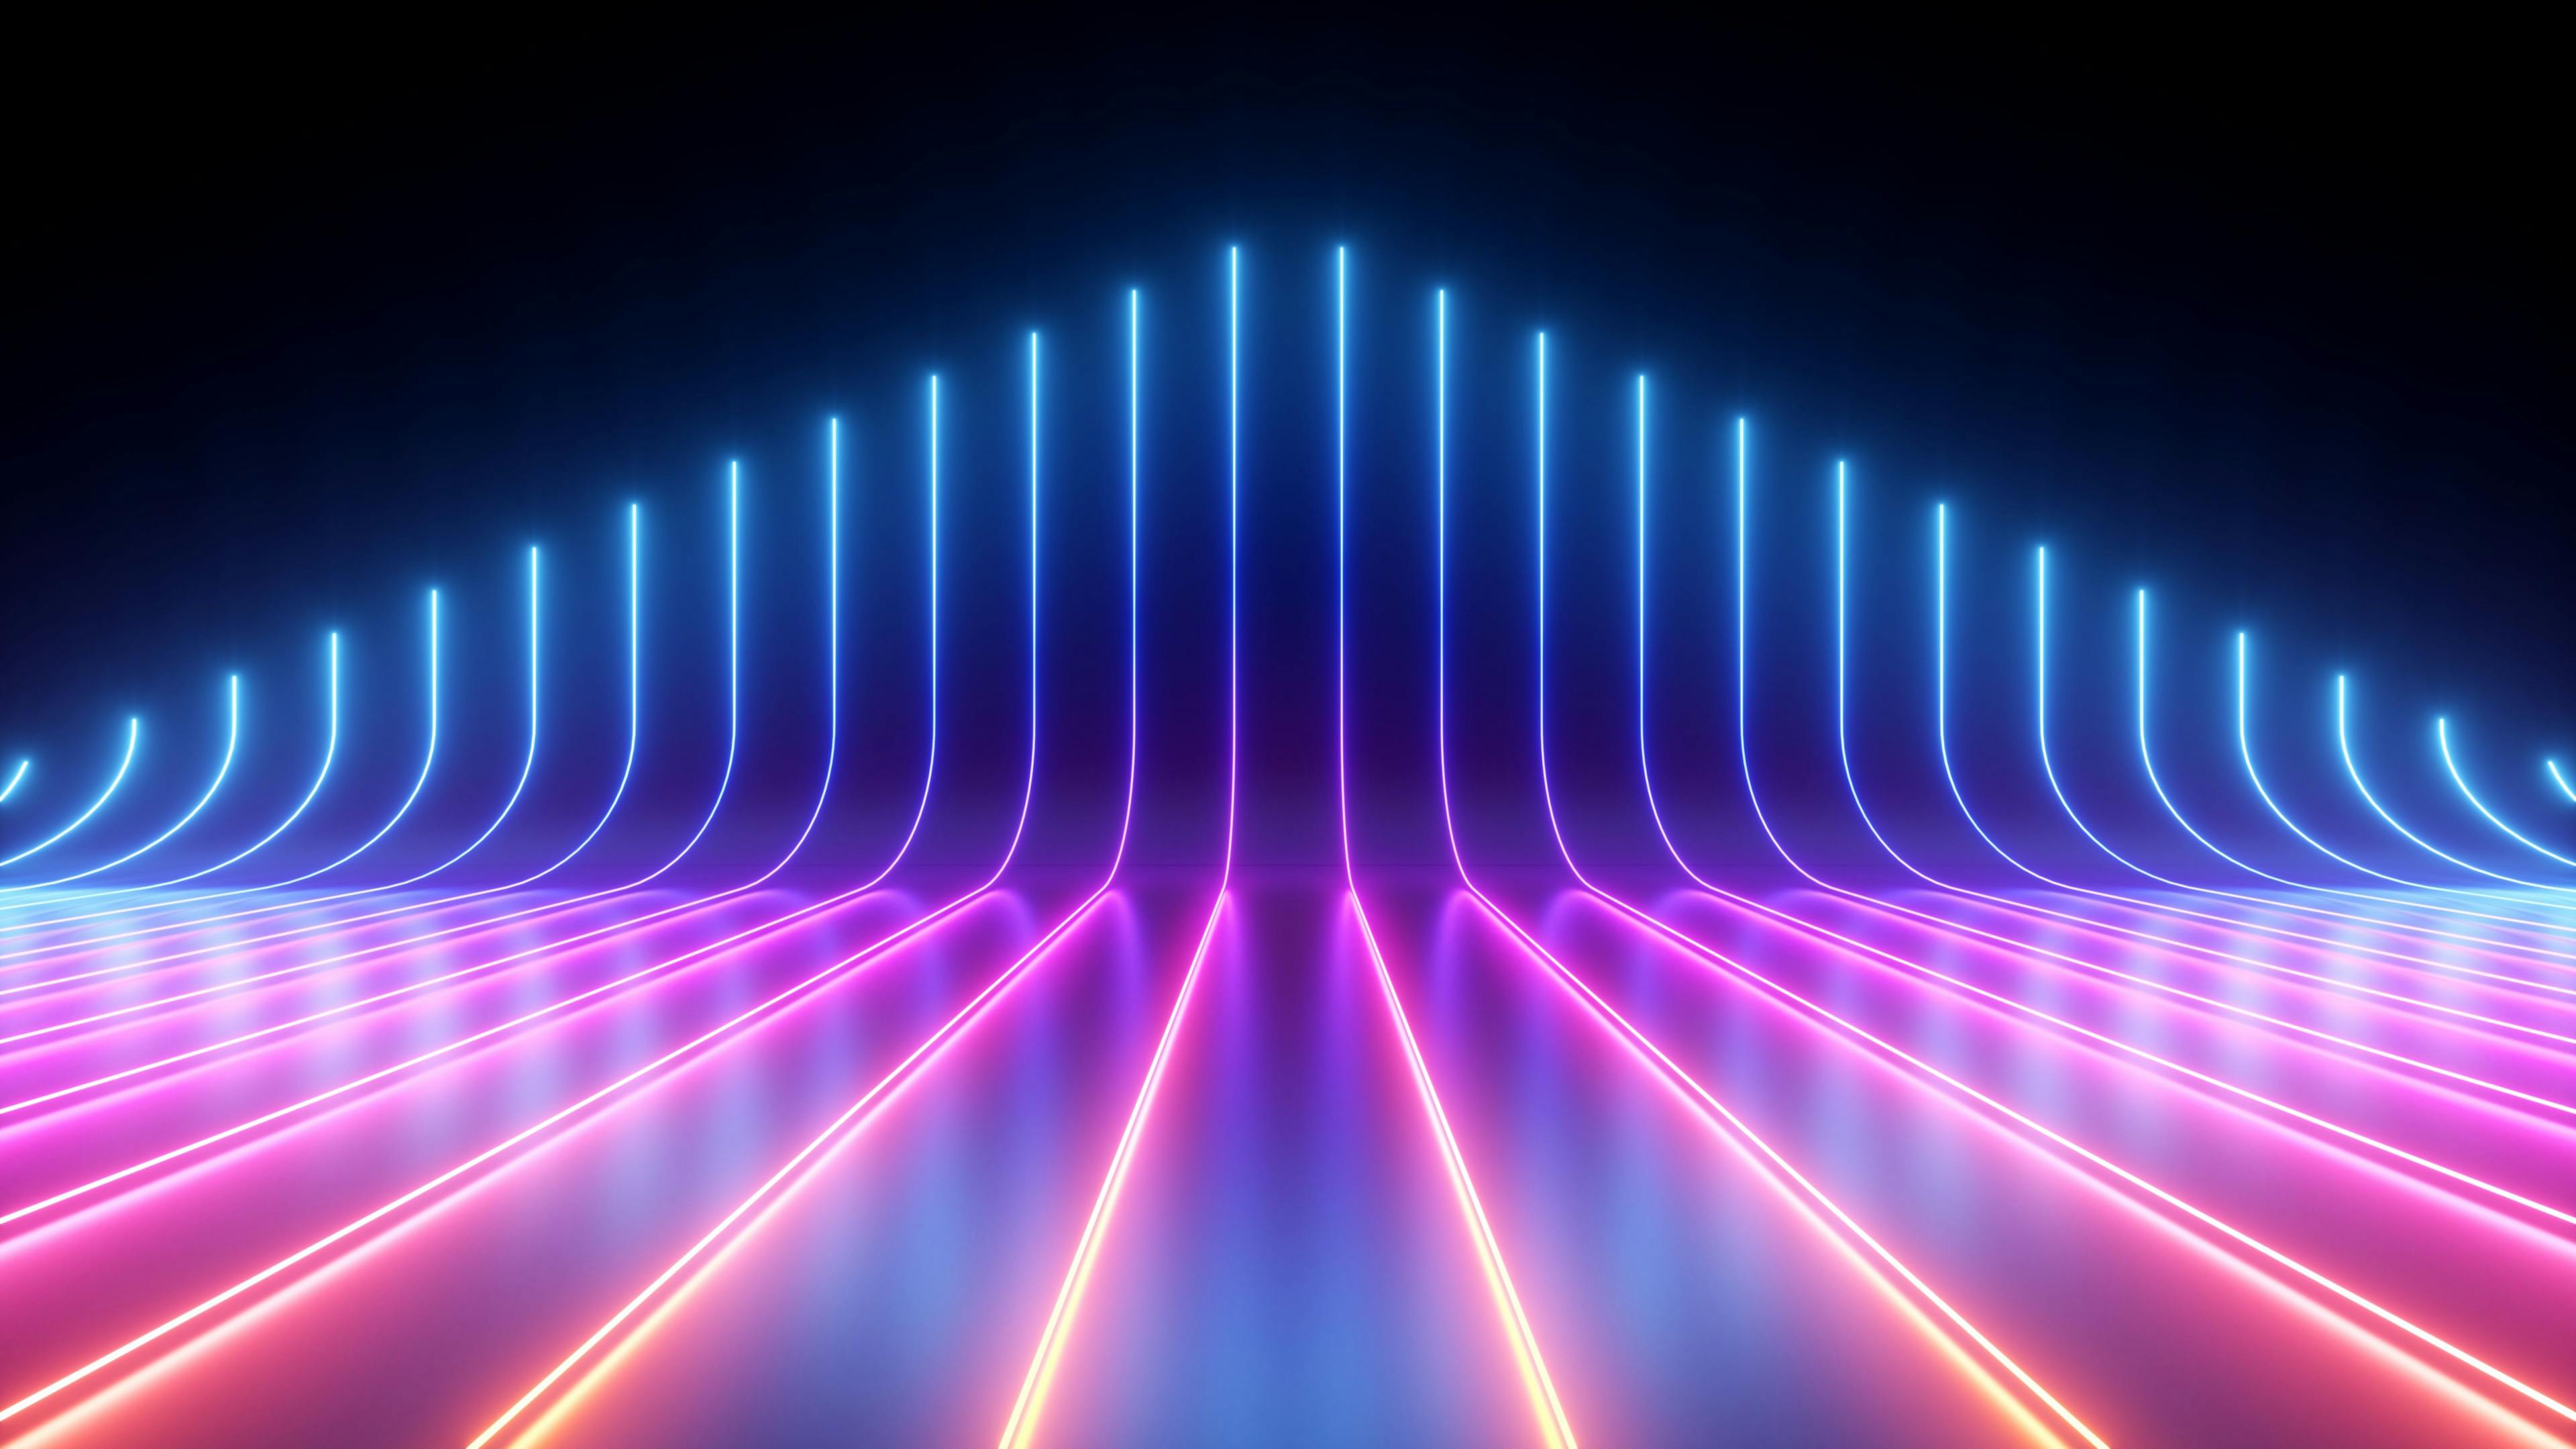 3d render, abstract minimal neon background, pink blue neon lines going up, glowing in ultraviolet spectrum. Cyber space. Laser show. Futuristic wallpaper | Image Credit: © wacomka - stock.adobe.com